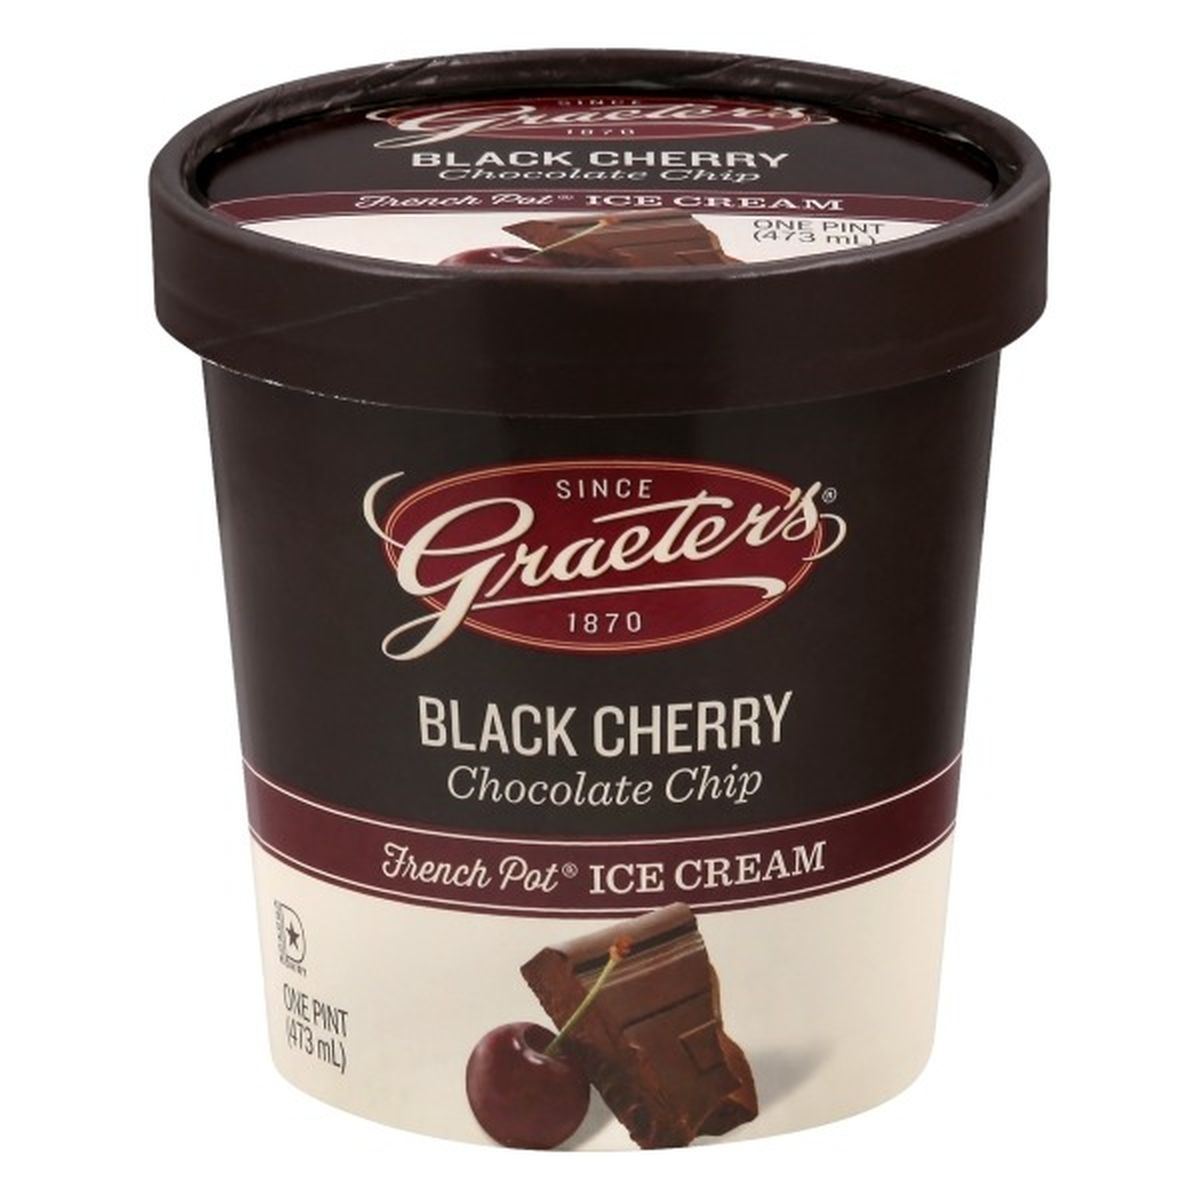 Calories in Graeter's Ice Cream, Black Cherry Chocolate Chip, French Pot